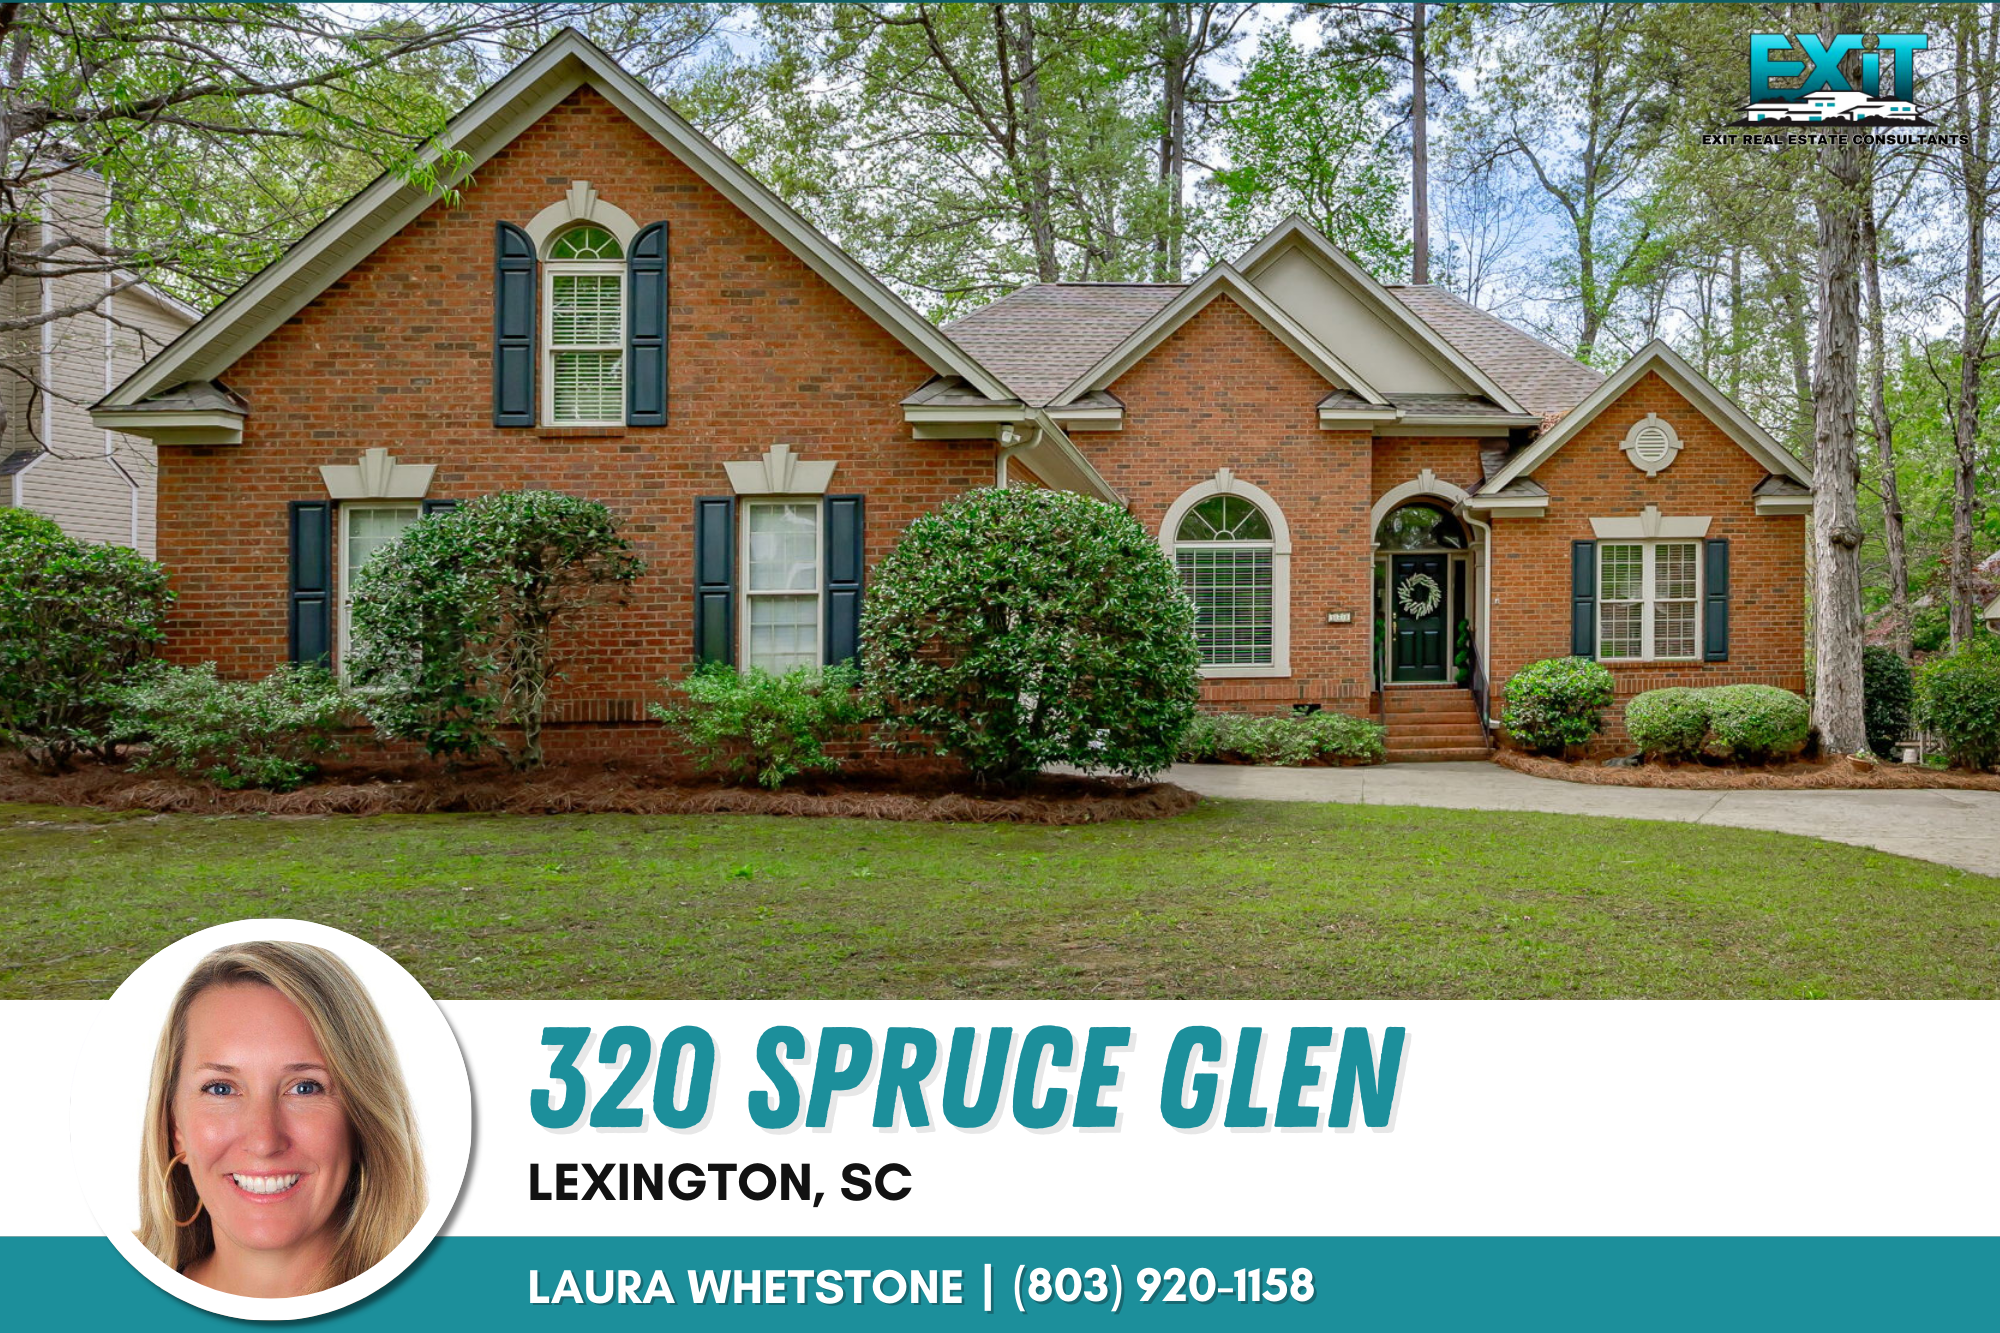 Just listed in Hope Ferry Plantation